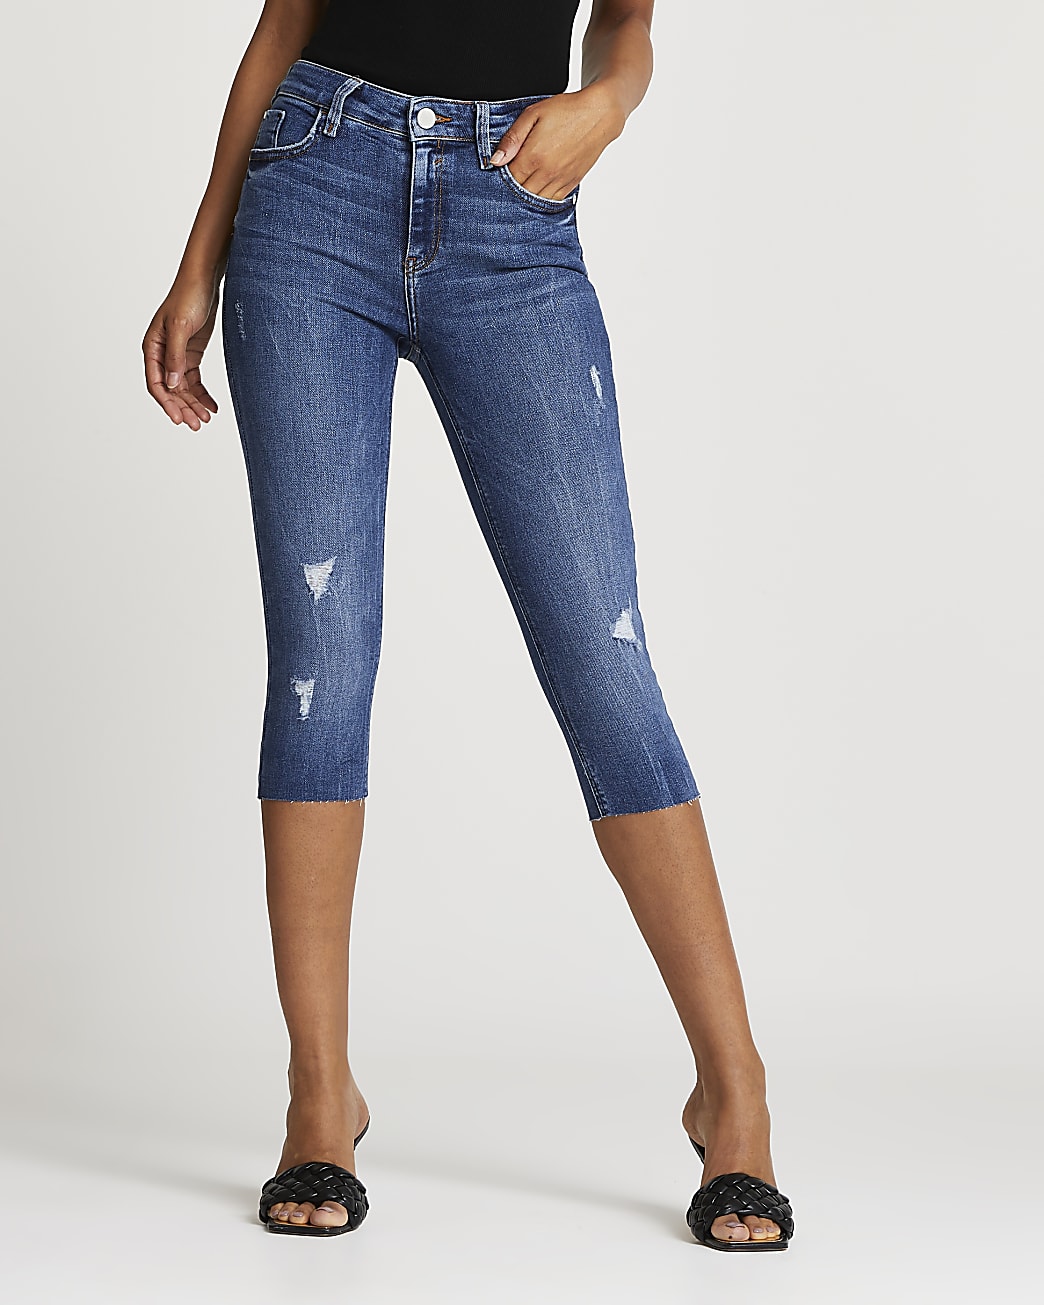 Blue skinny pedal pusher jeans